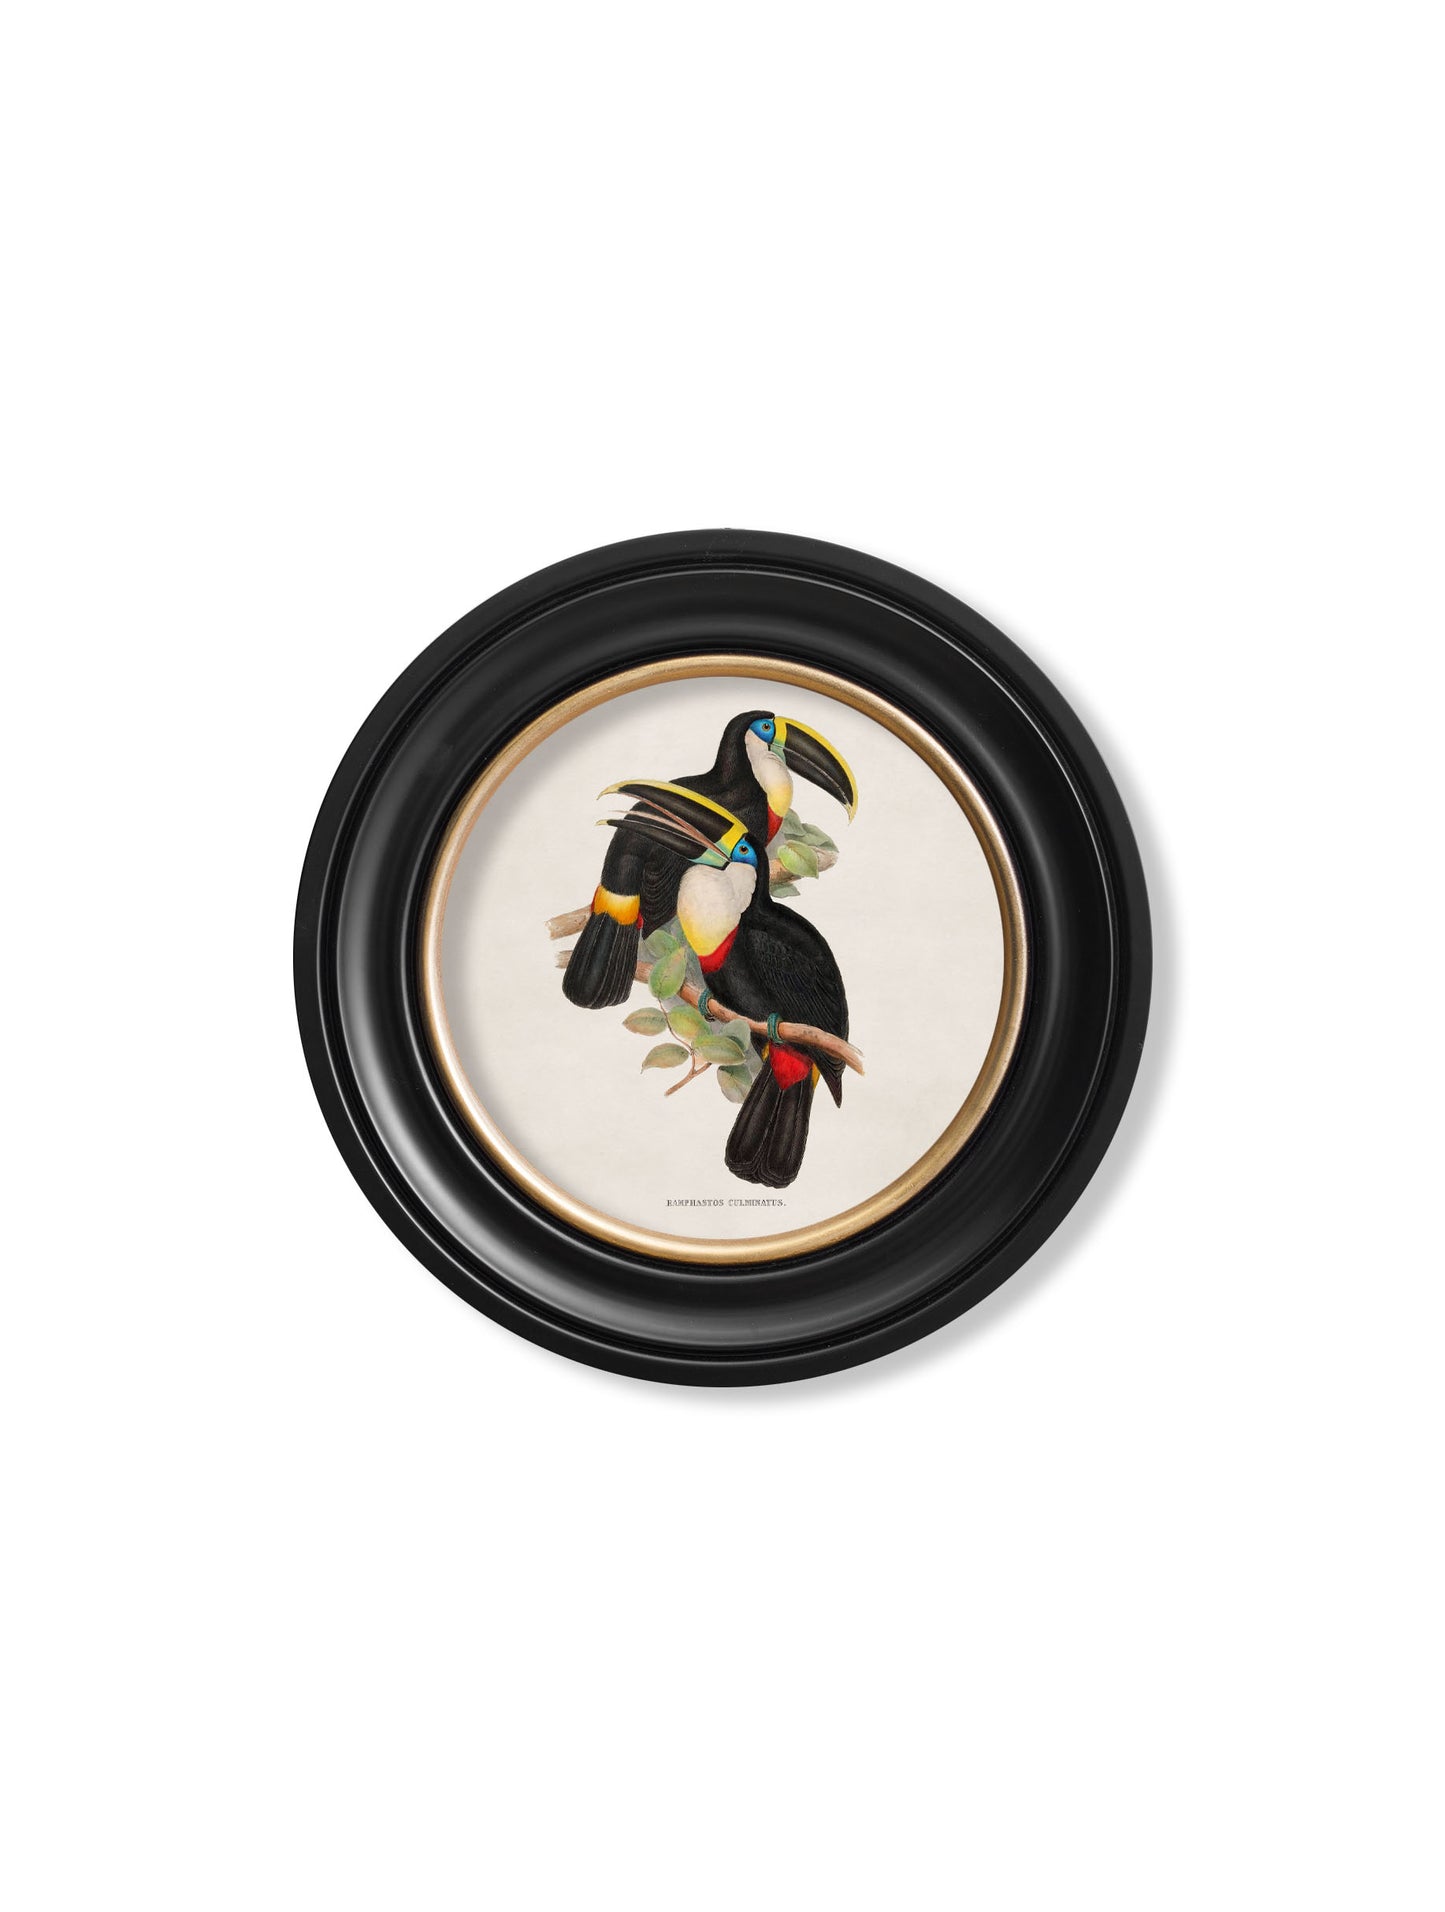 Round Framed Gould Toucans Print